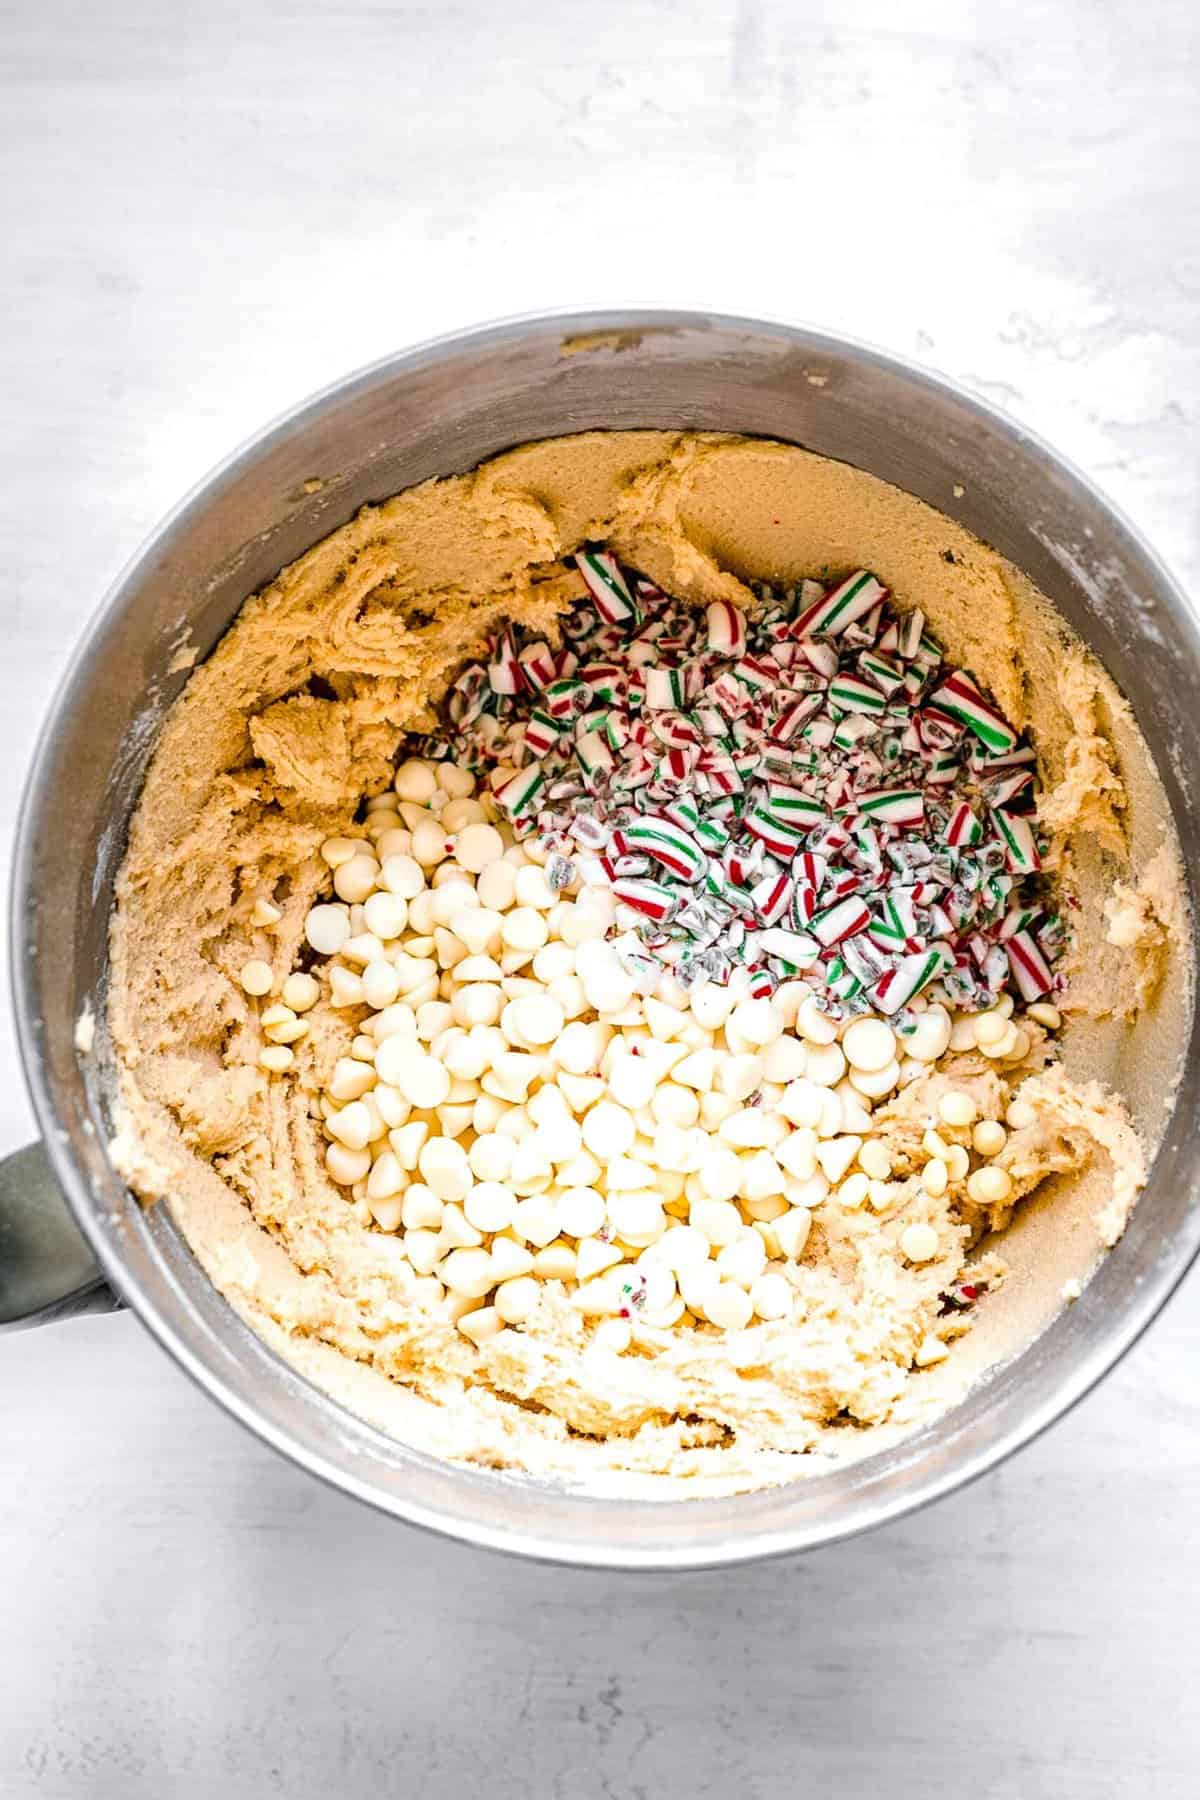 white chocolate chips and crushed candy canes sitting on top of the cookie dough in a metal bowl